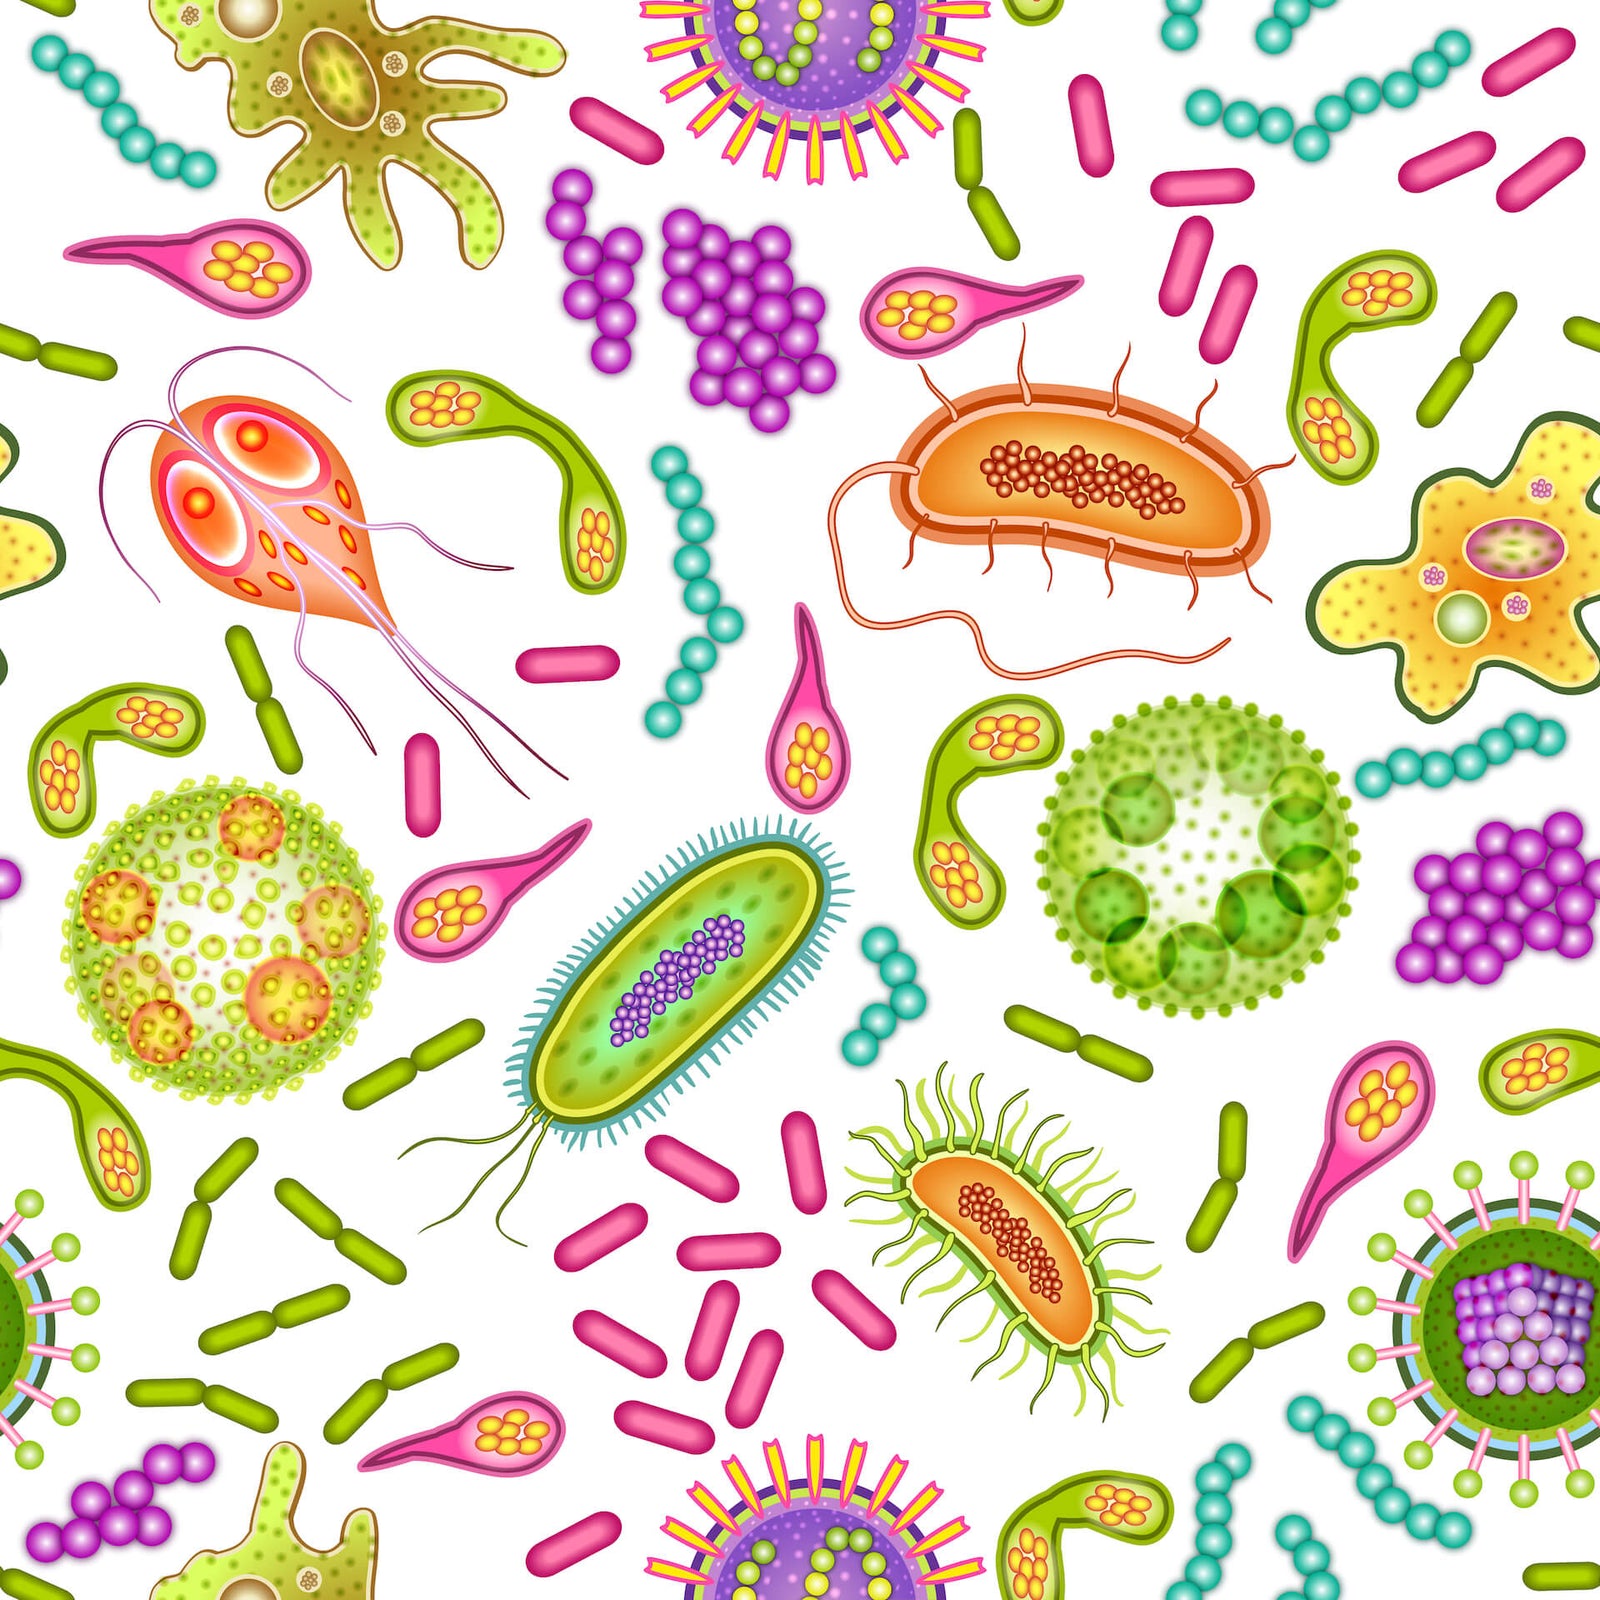 microbiome bacteria picture. Image by macrovector on Freepik.